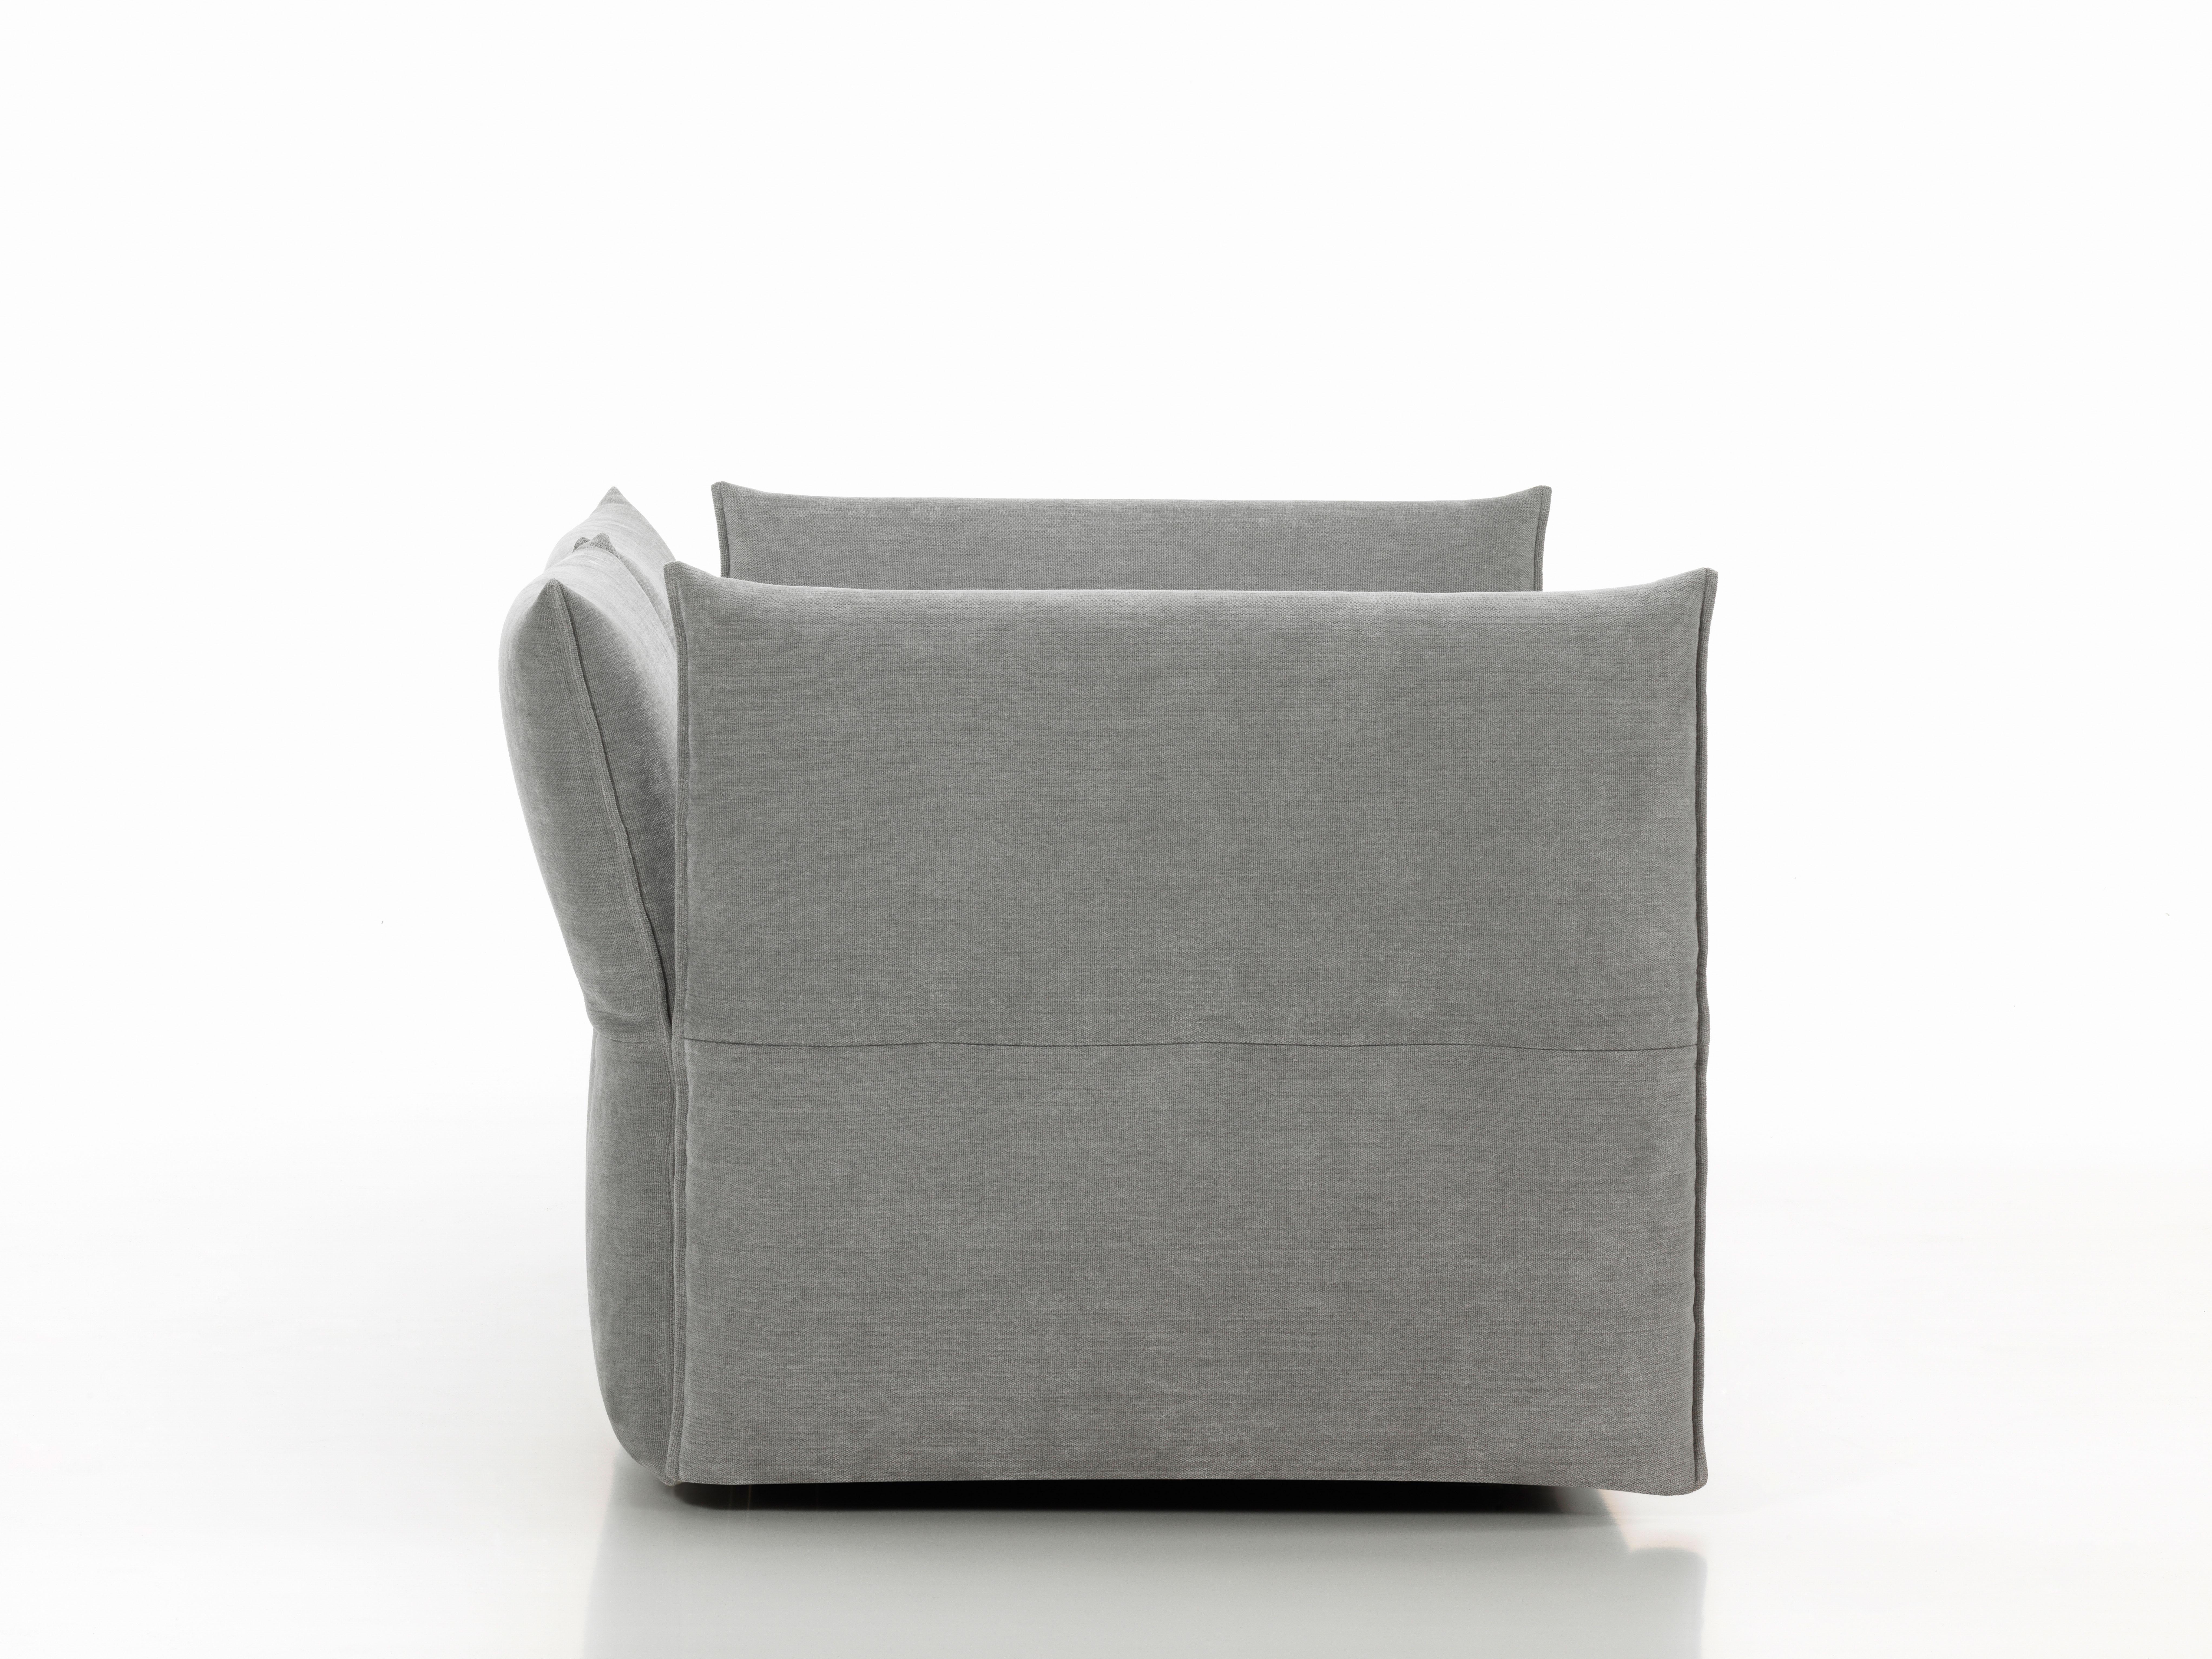 Swiss Vitra Mariposa 2 1/2-Seat Sofa in Silver Grey by Edward Barber & Jay Osgerby For Sale